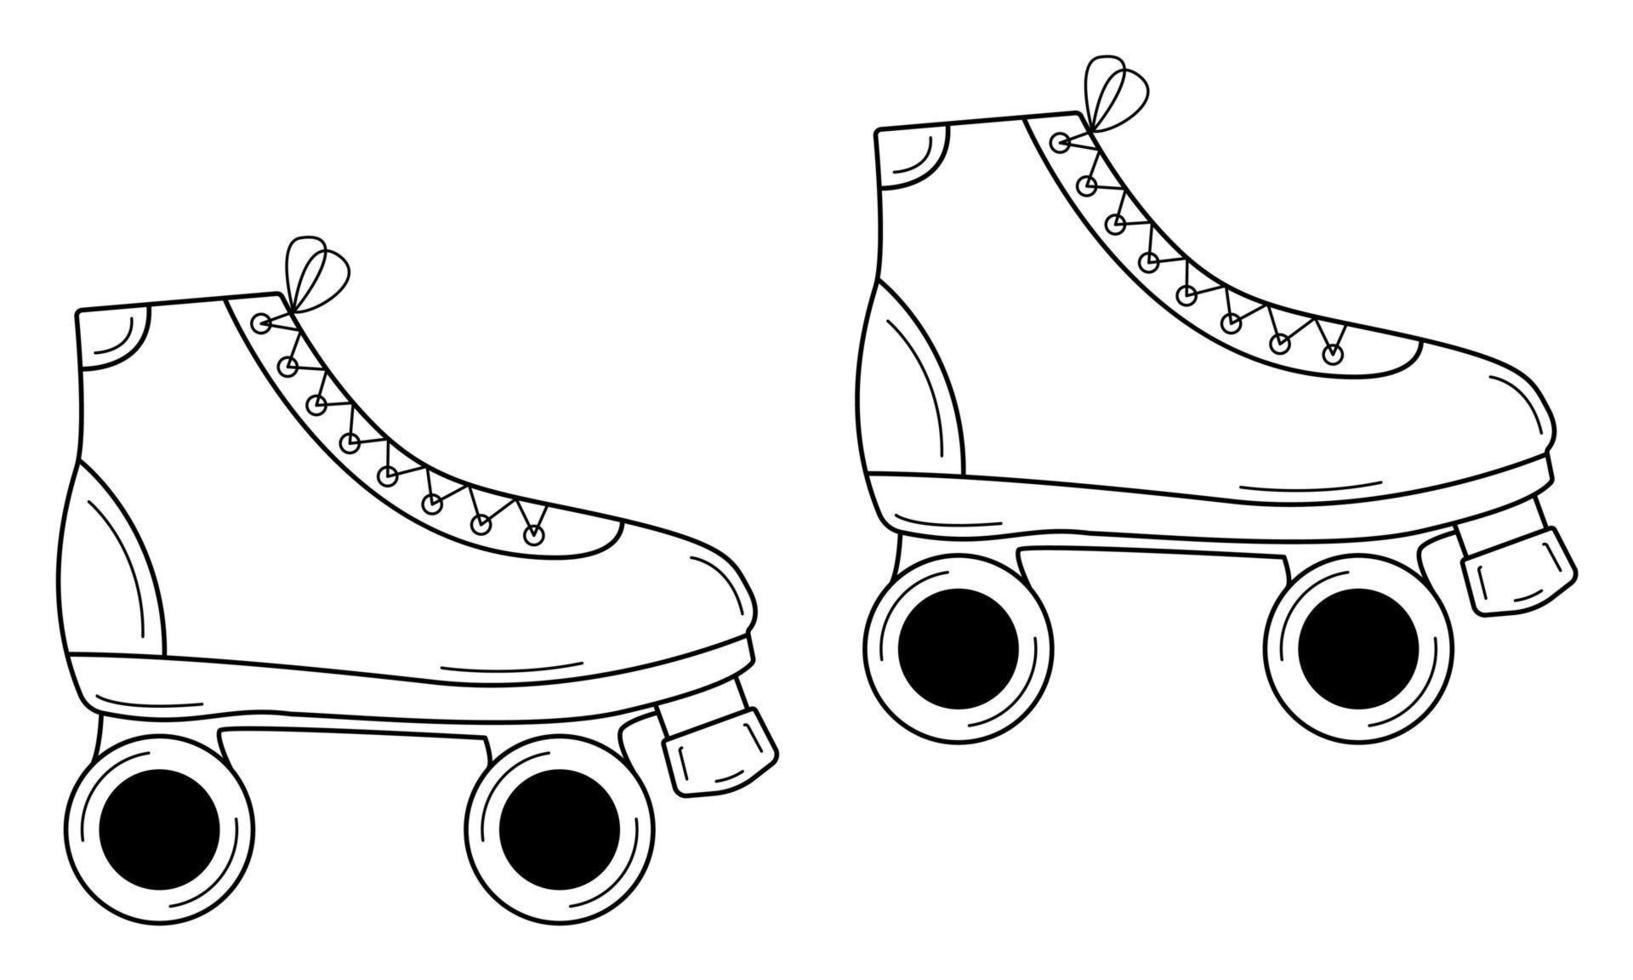 Hand drawn roller skates. Equipment for sports and outdoor activities. Attribute of the 80s, 90s. Doodle style. Sketch. Vector illustration